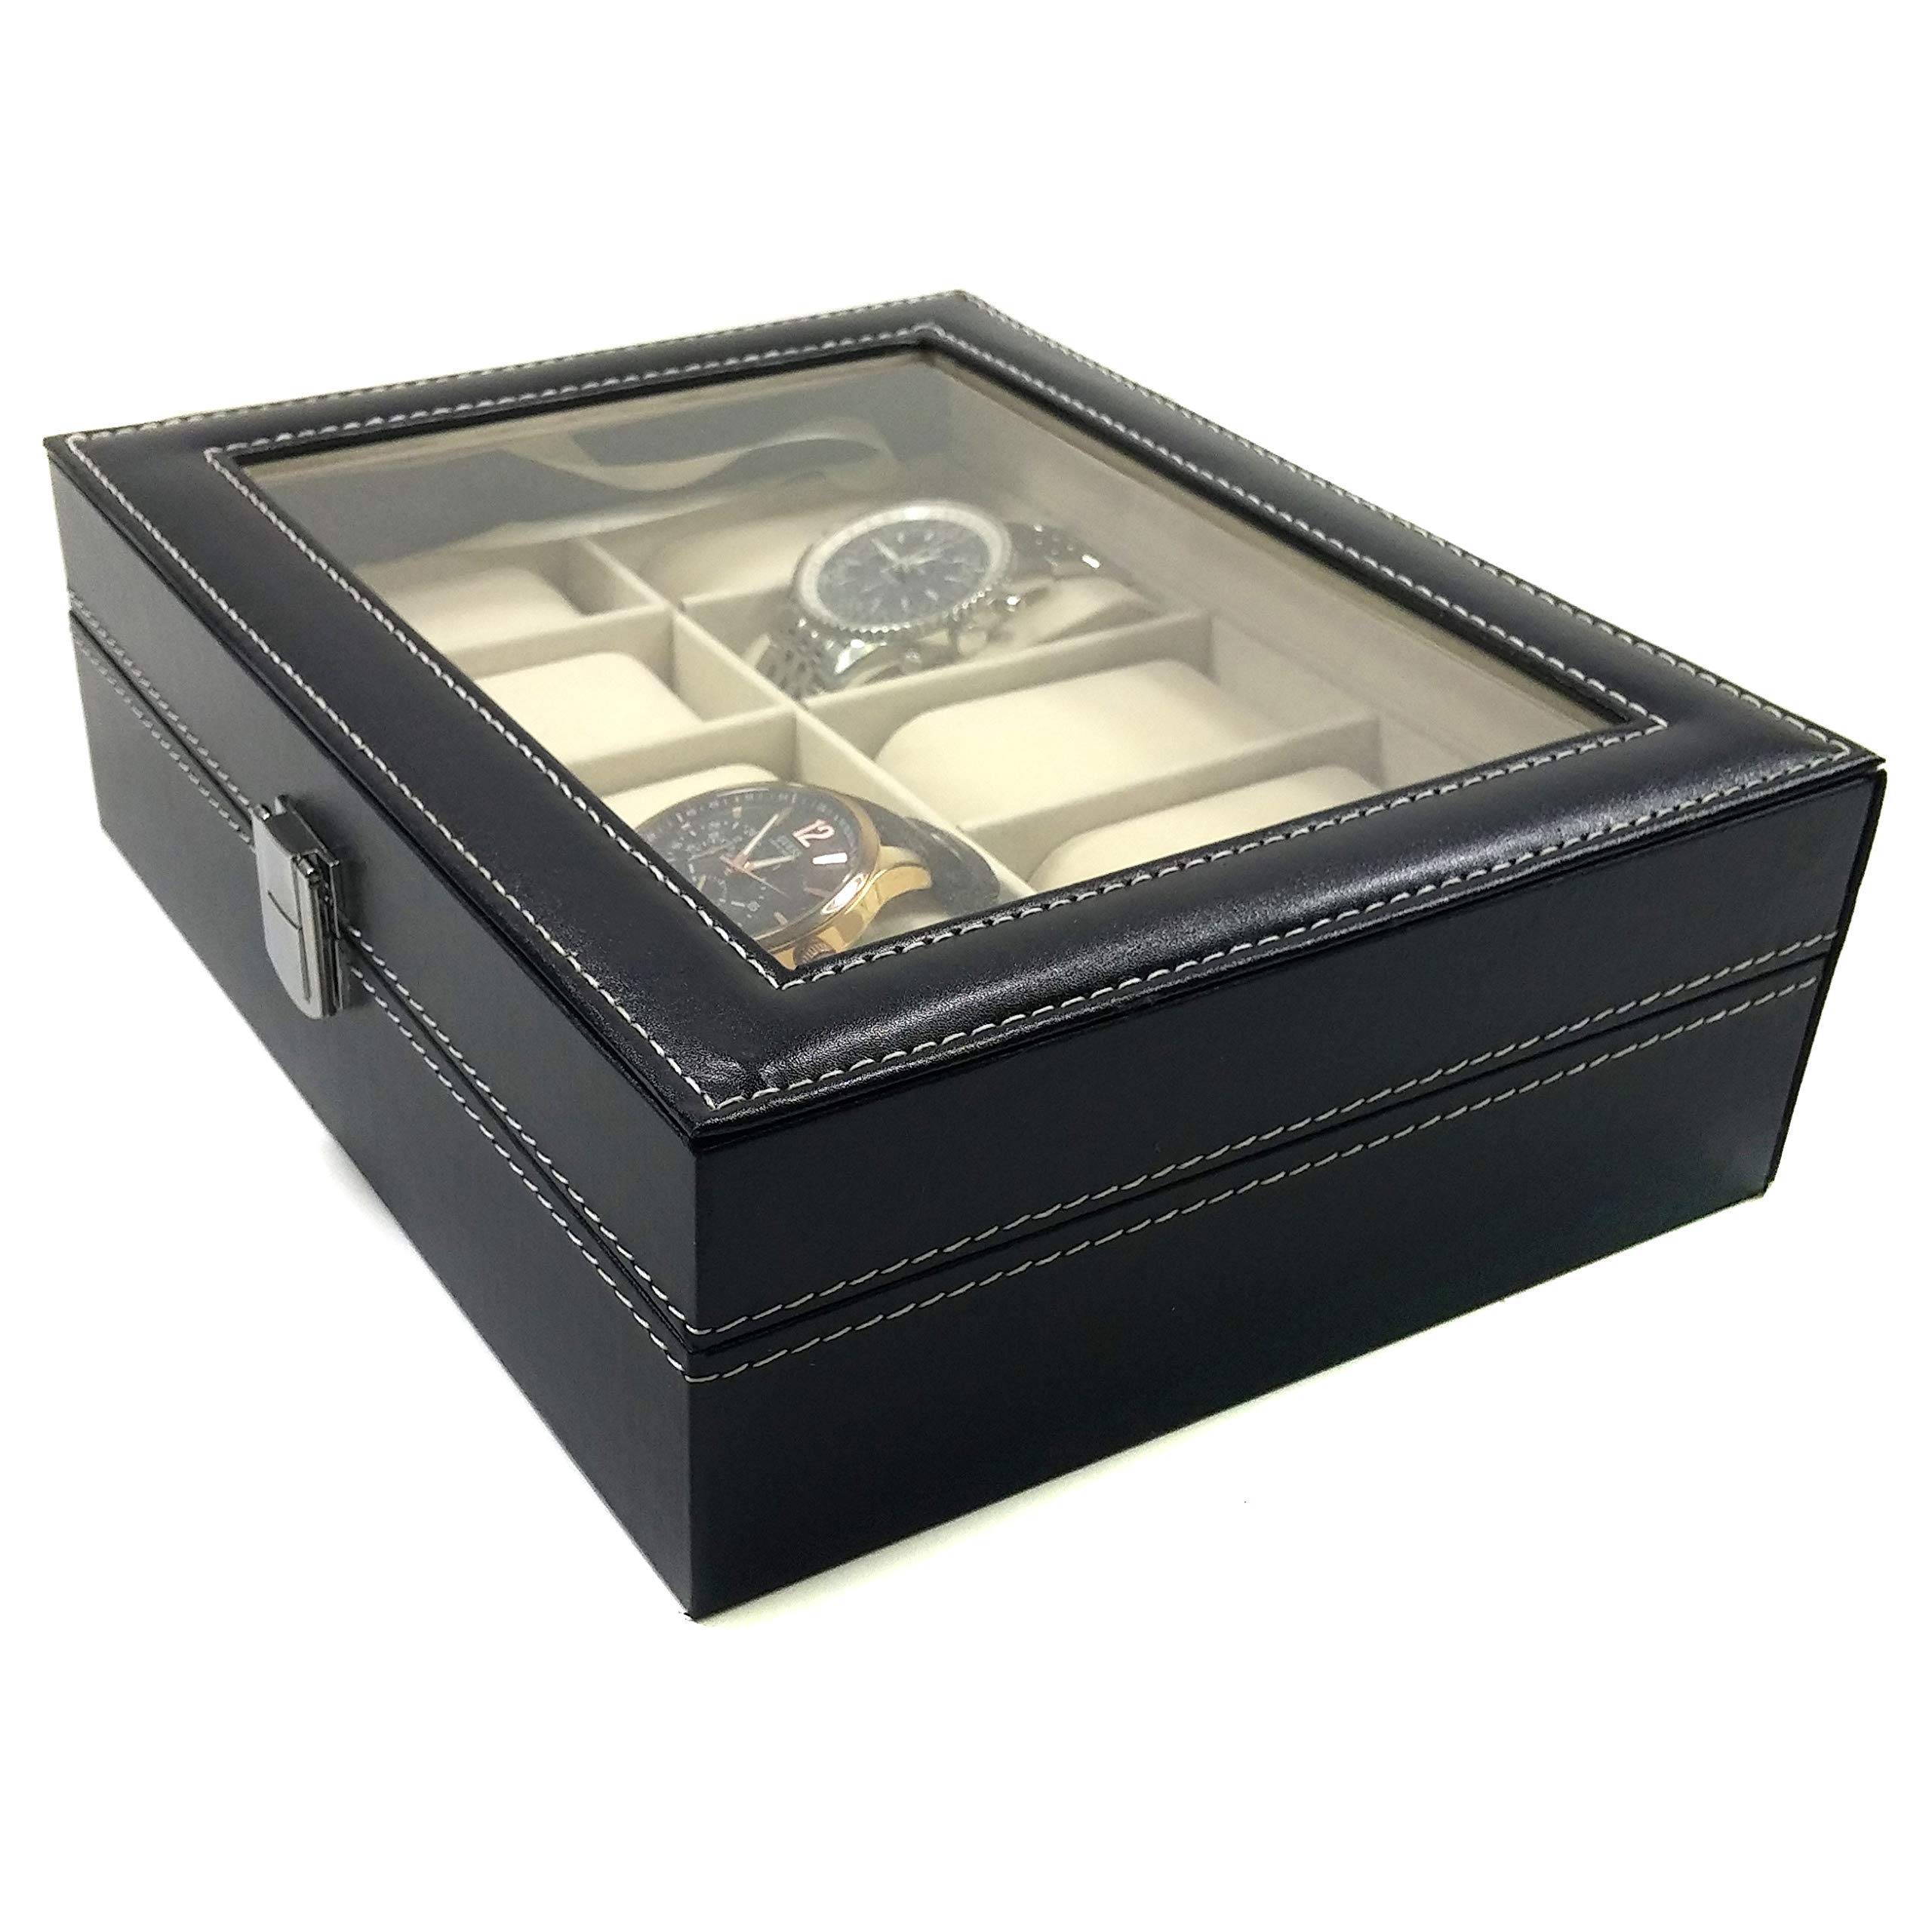 SciencePurchase Faux Leather Display Glass Top Jewelry Case Organizer, 10 Mens Watch Box, Black